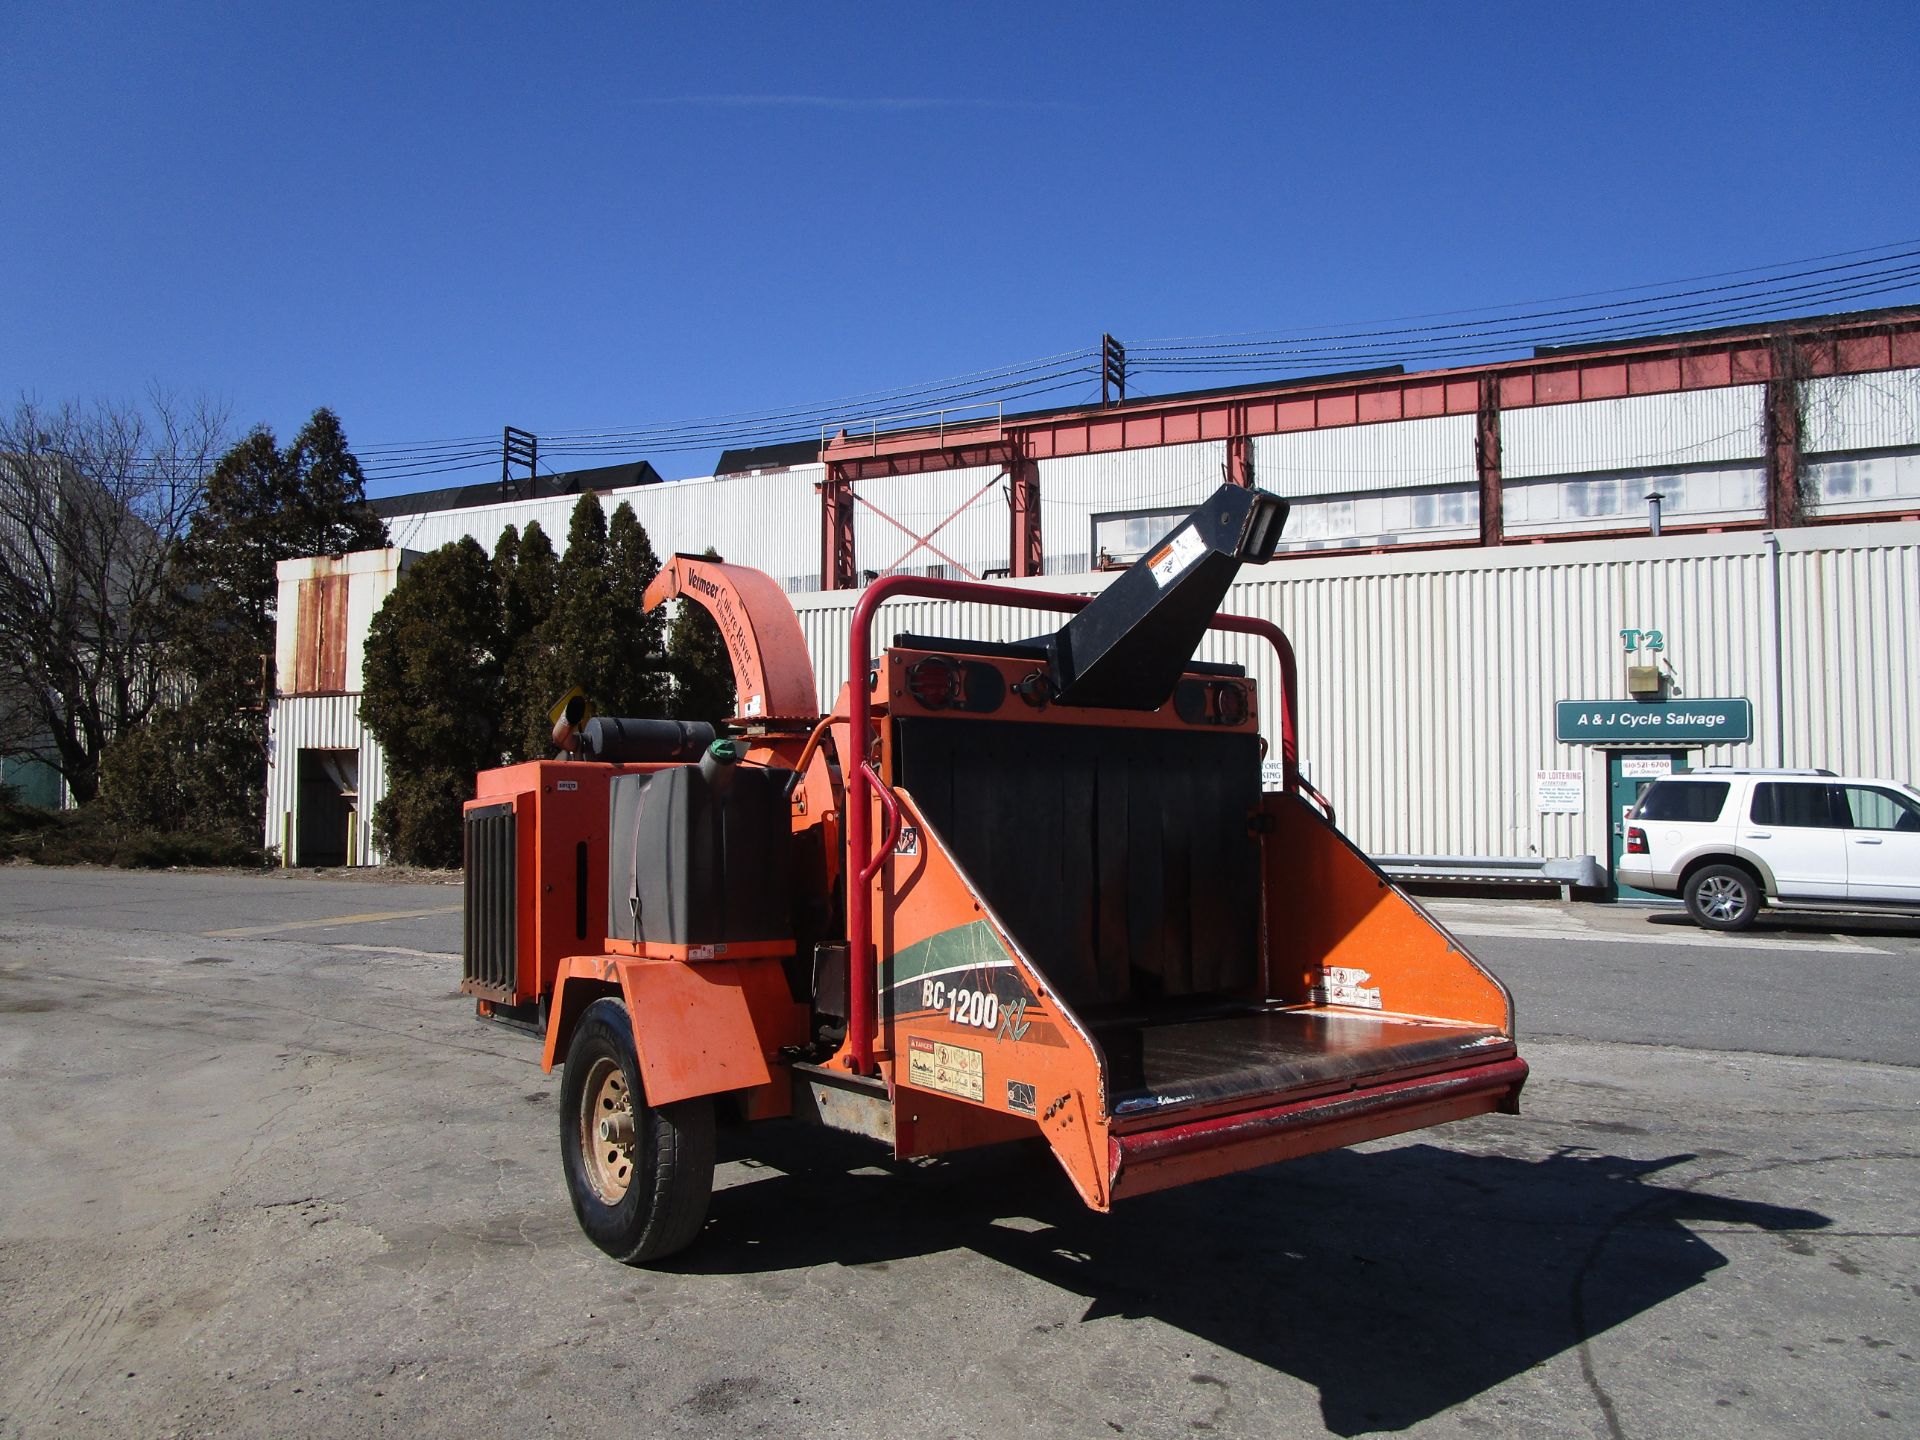 2011 Vermeer BC1200 Chipper - Image 6 of 10